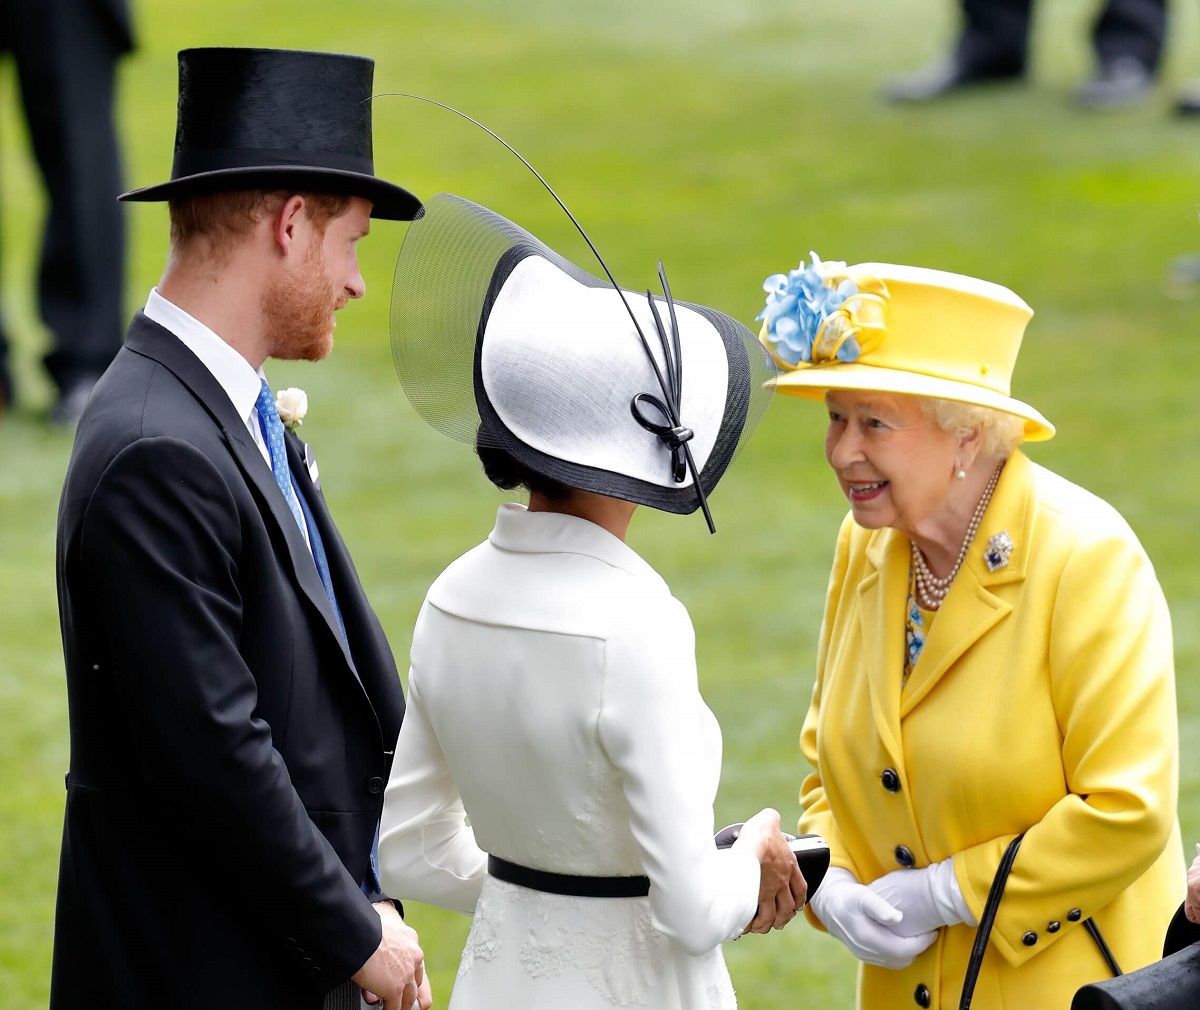 Prince Harry, Meghan Markle, and Queen Elizabeth II at day 1 of Royal Ascot together